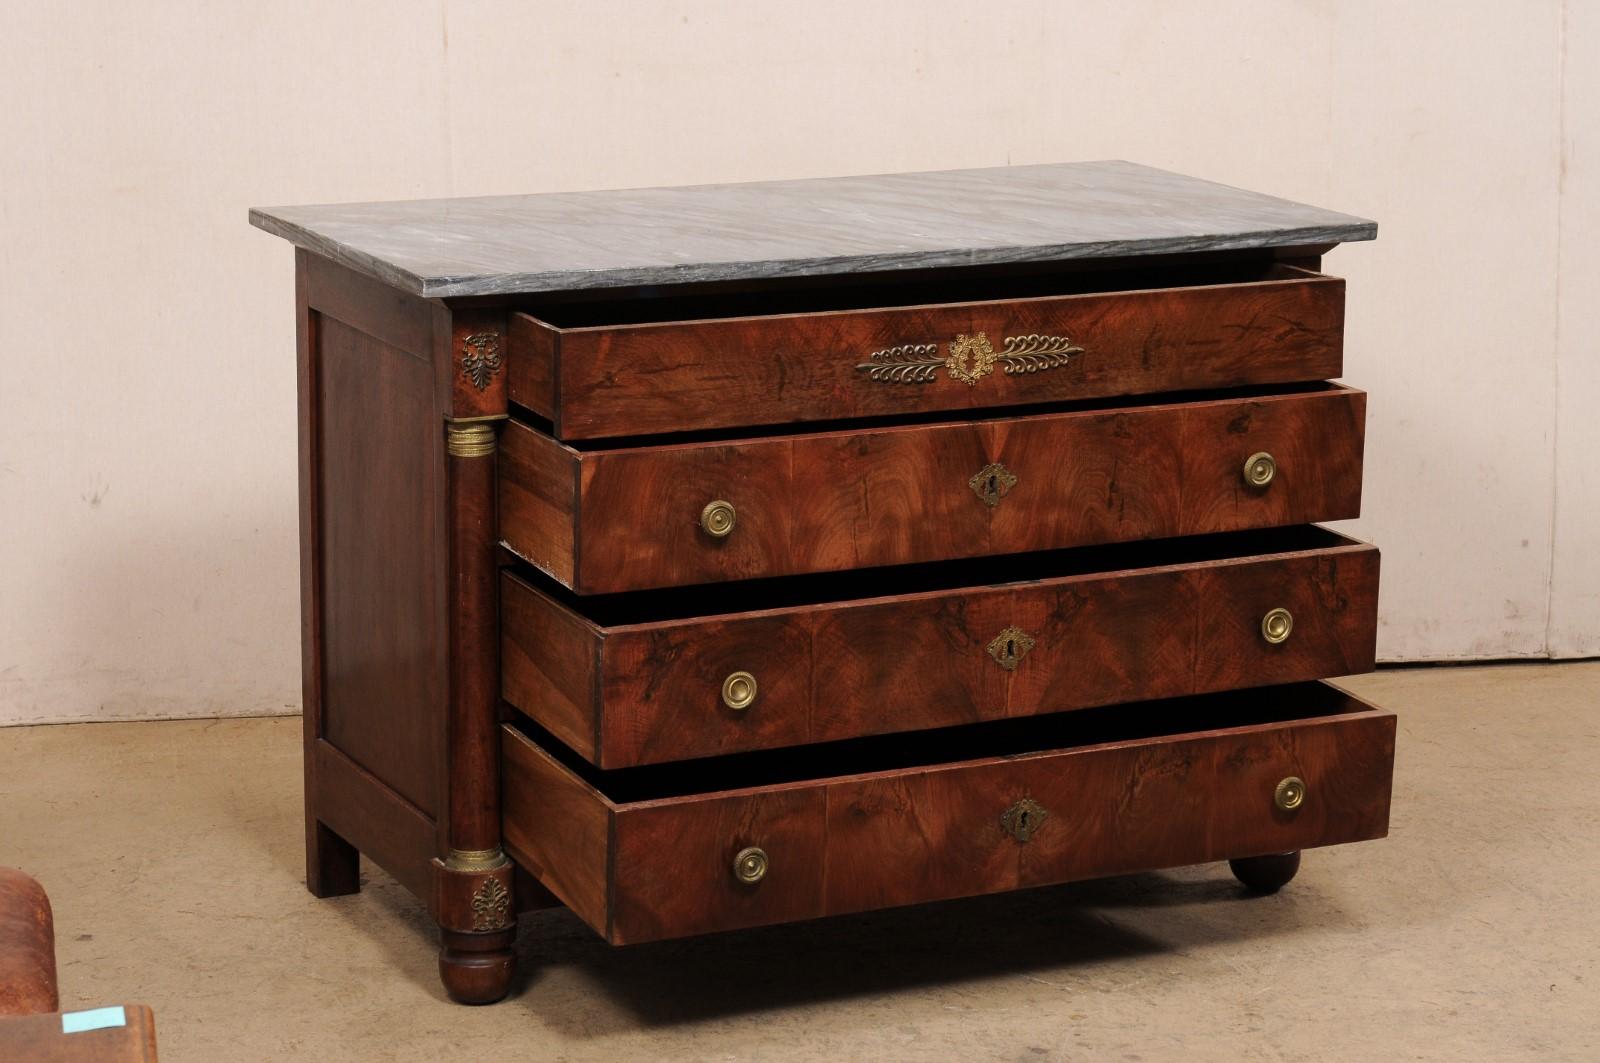 19th Century Neoclassical French Marble-Top Commode W/Exquisite Brass Accents For Sale 1